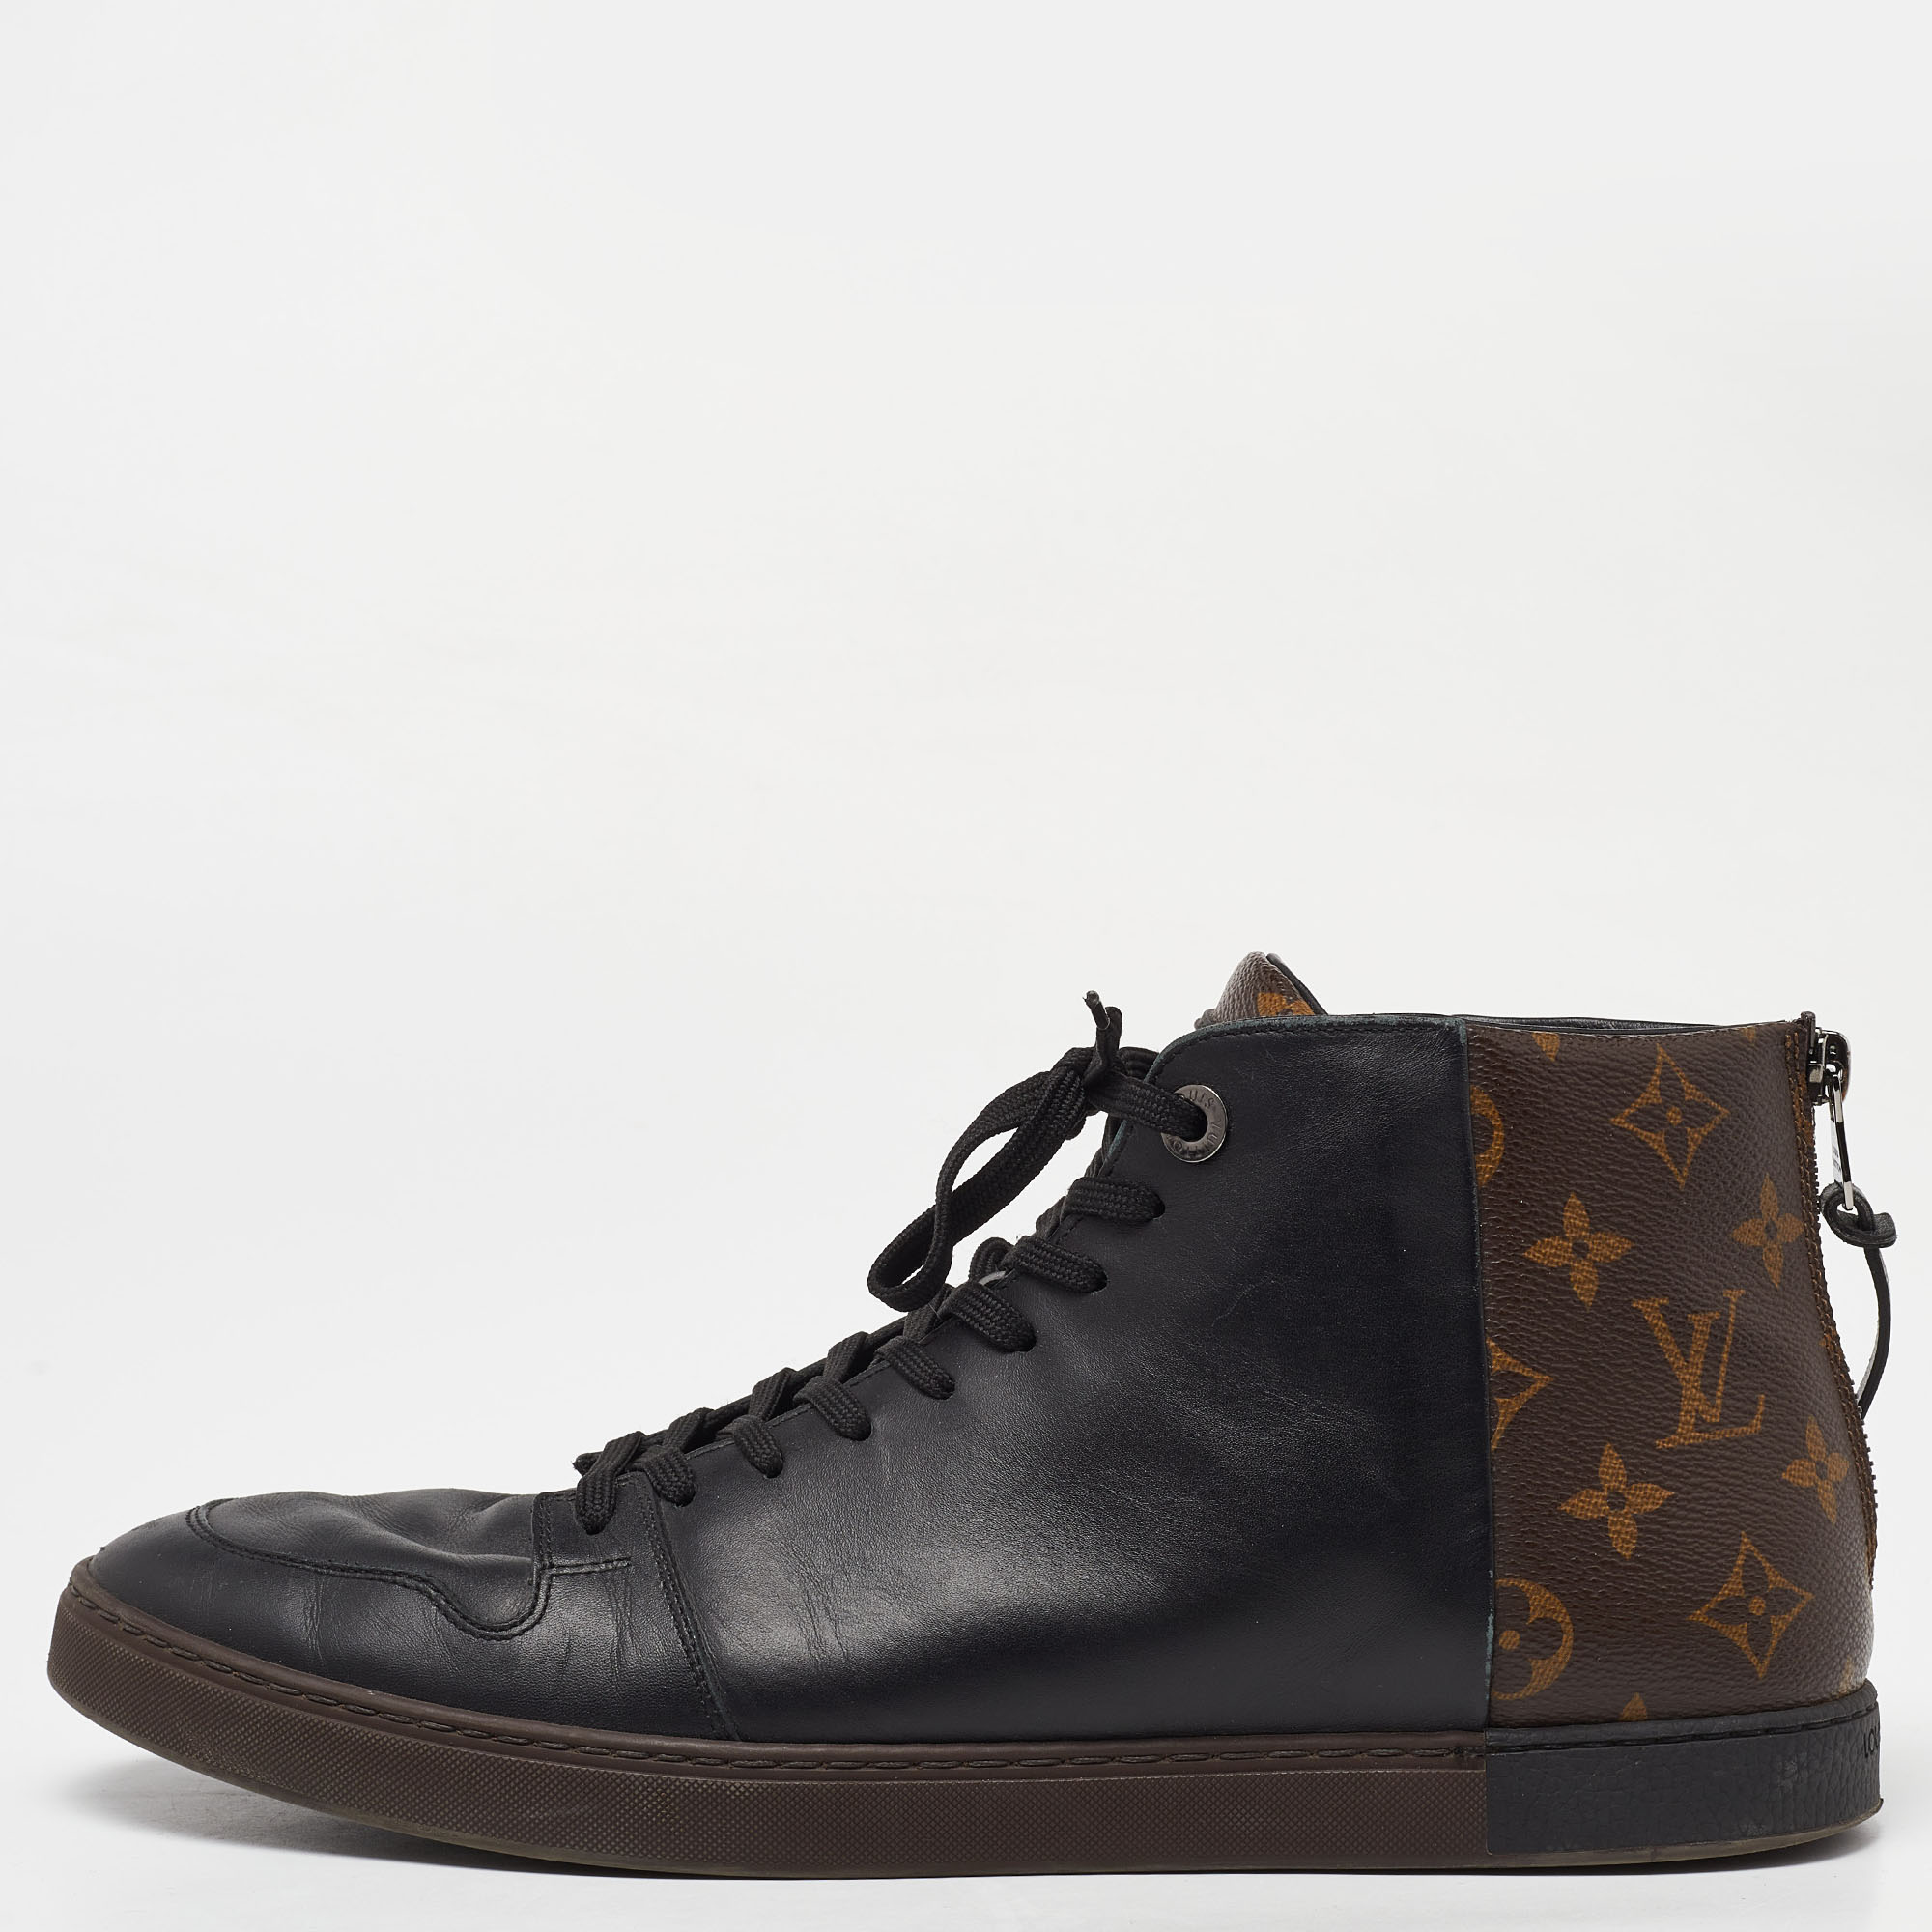 Louis vuitton black/brown leather and monogram canvas high top sneakers size 43